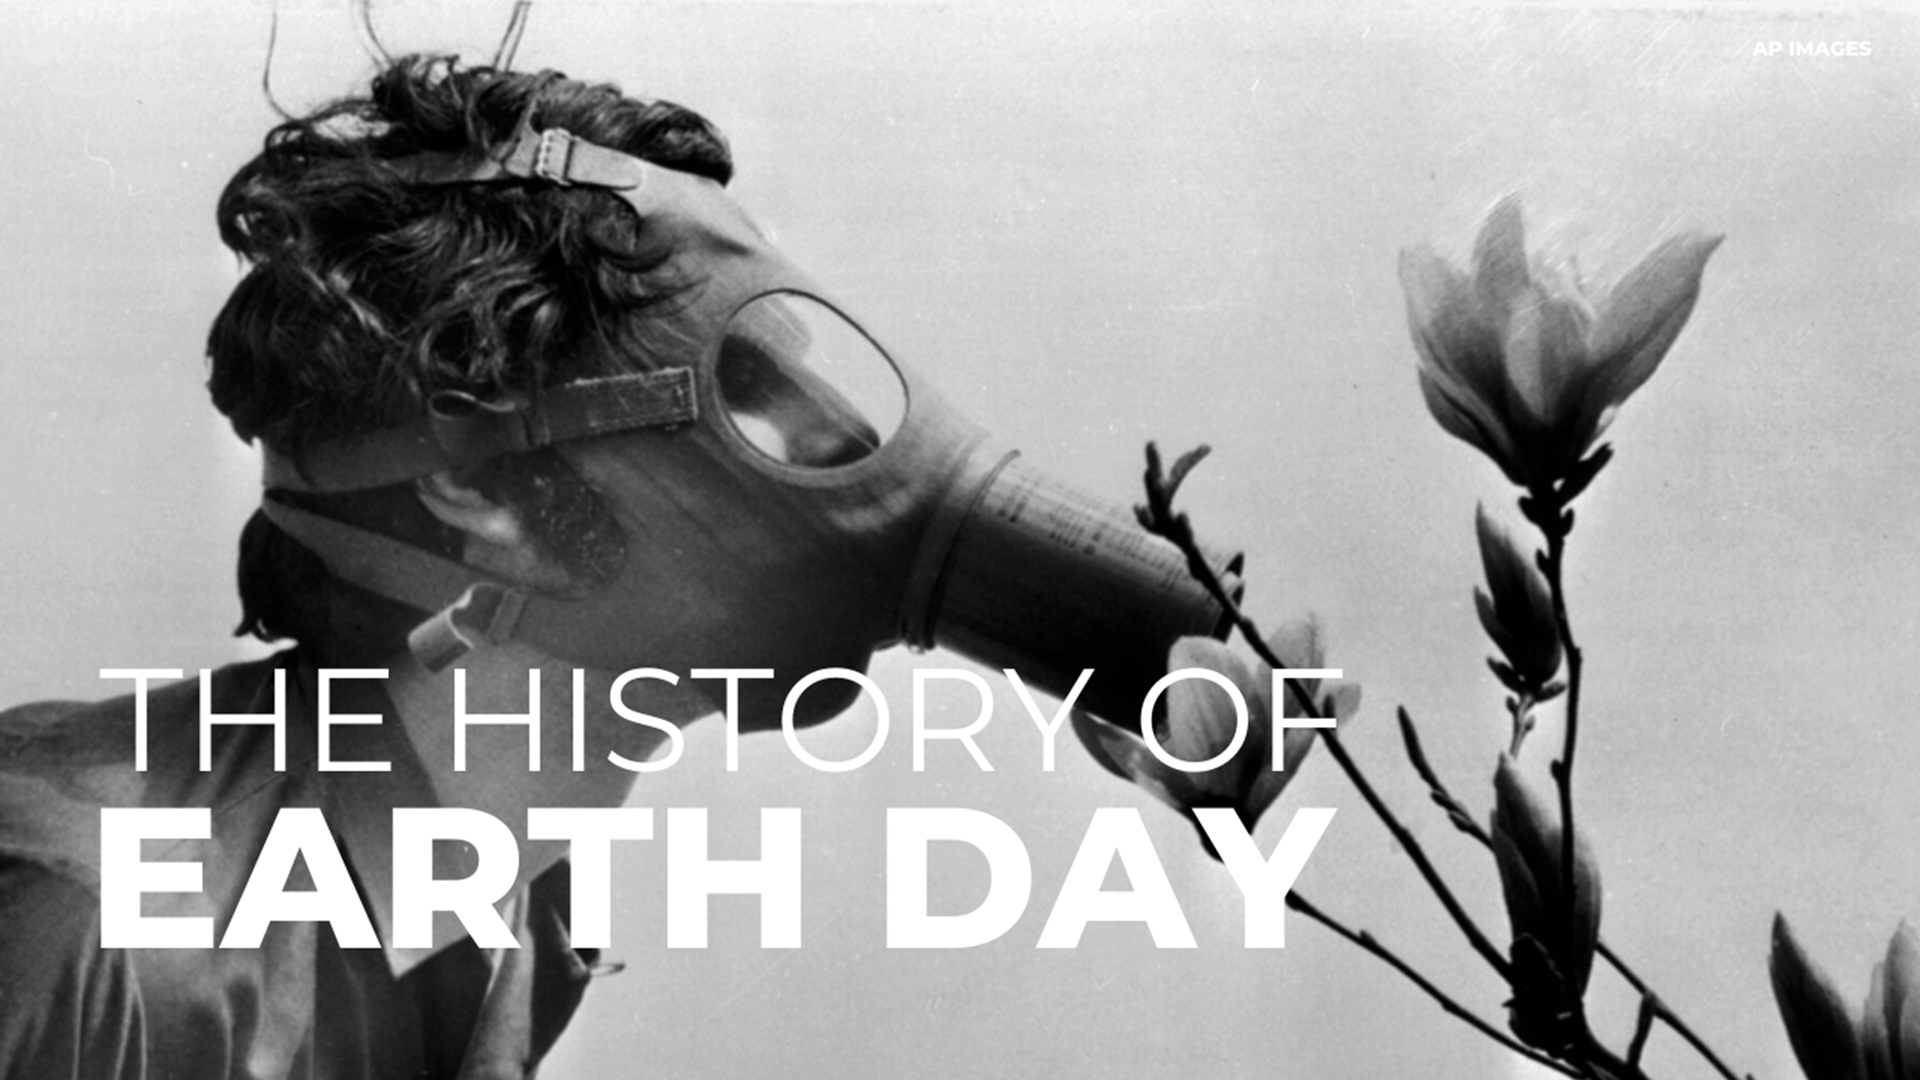 We take a look back at the first Earth Day in 1970. The event brought millions of Americans together and inspired future environmental legislation.